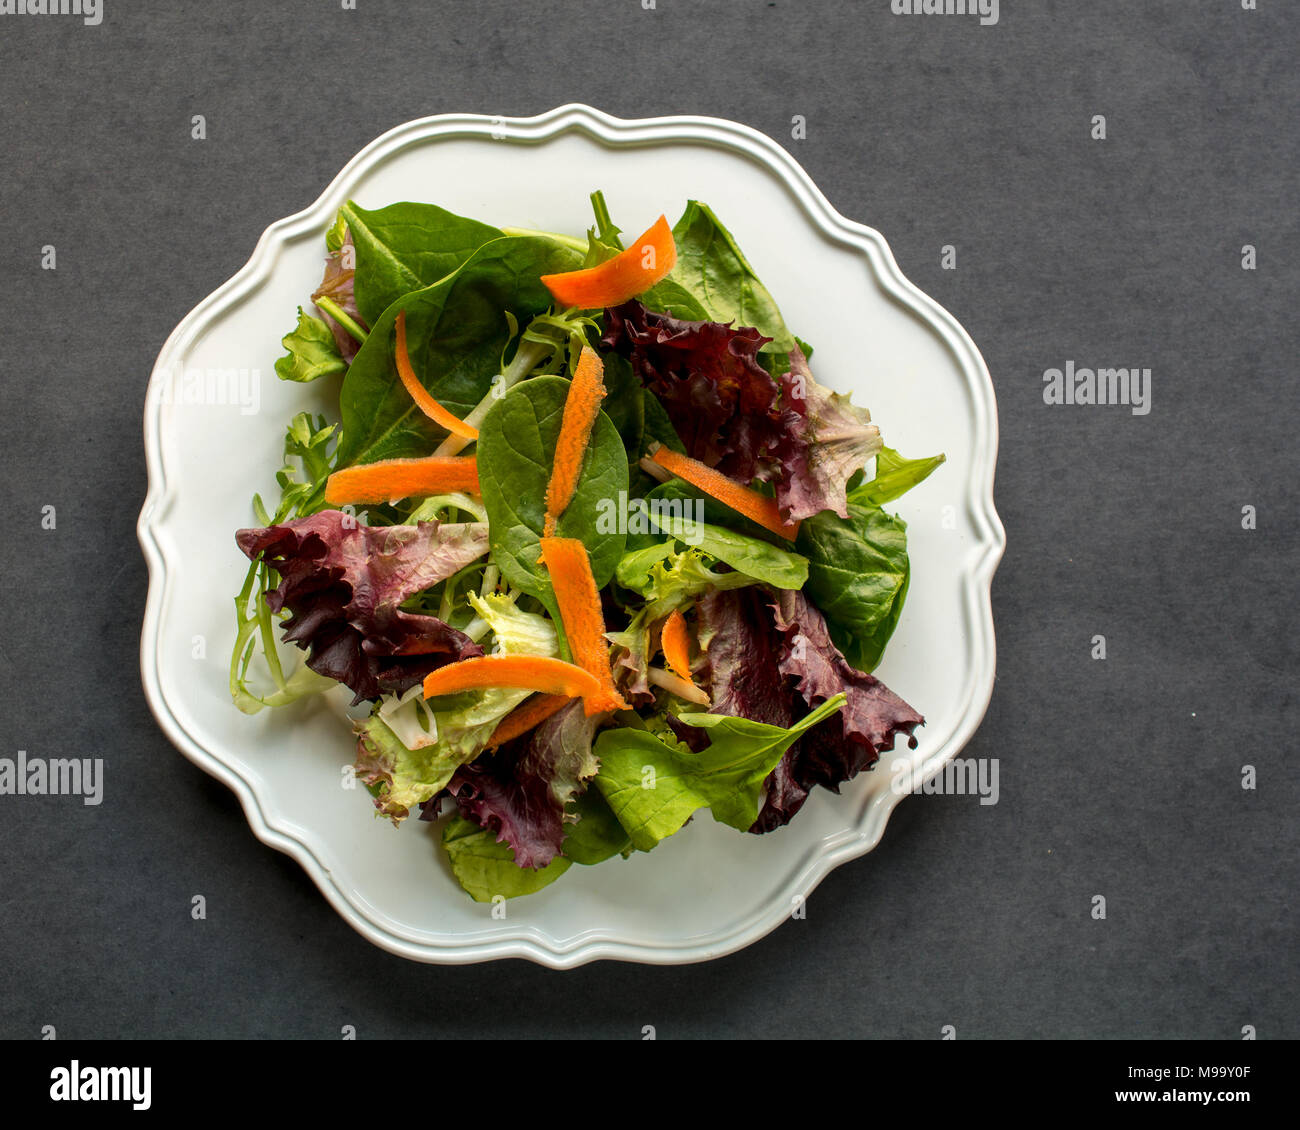 Unseasoned organic mixed greens salad  with carrots in white plate bowl, on dark background, top view-diet food concept Stock Photo